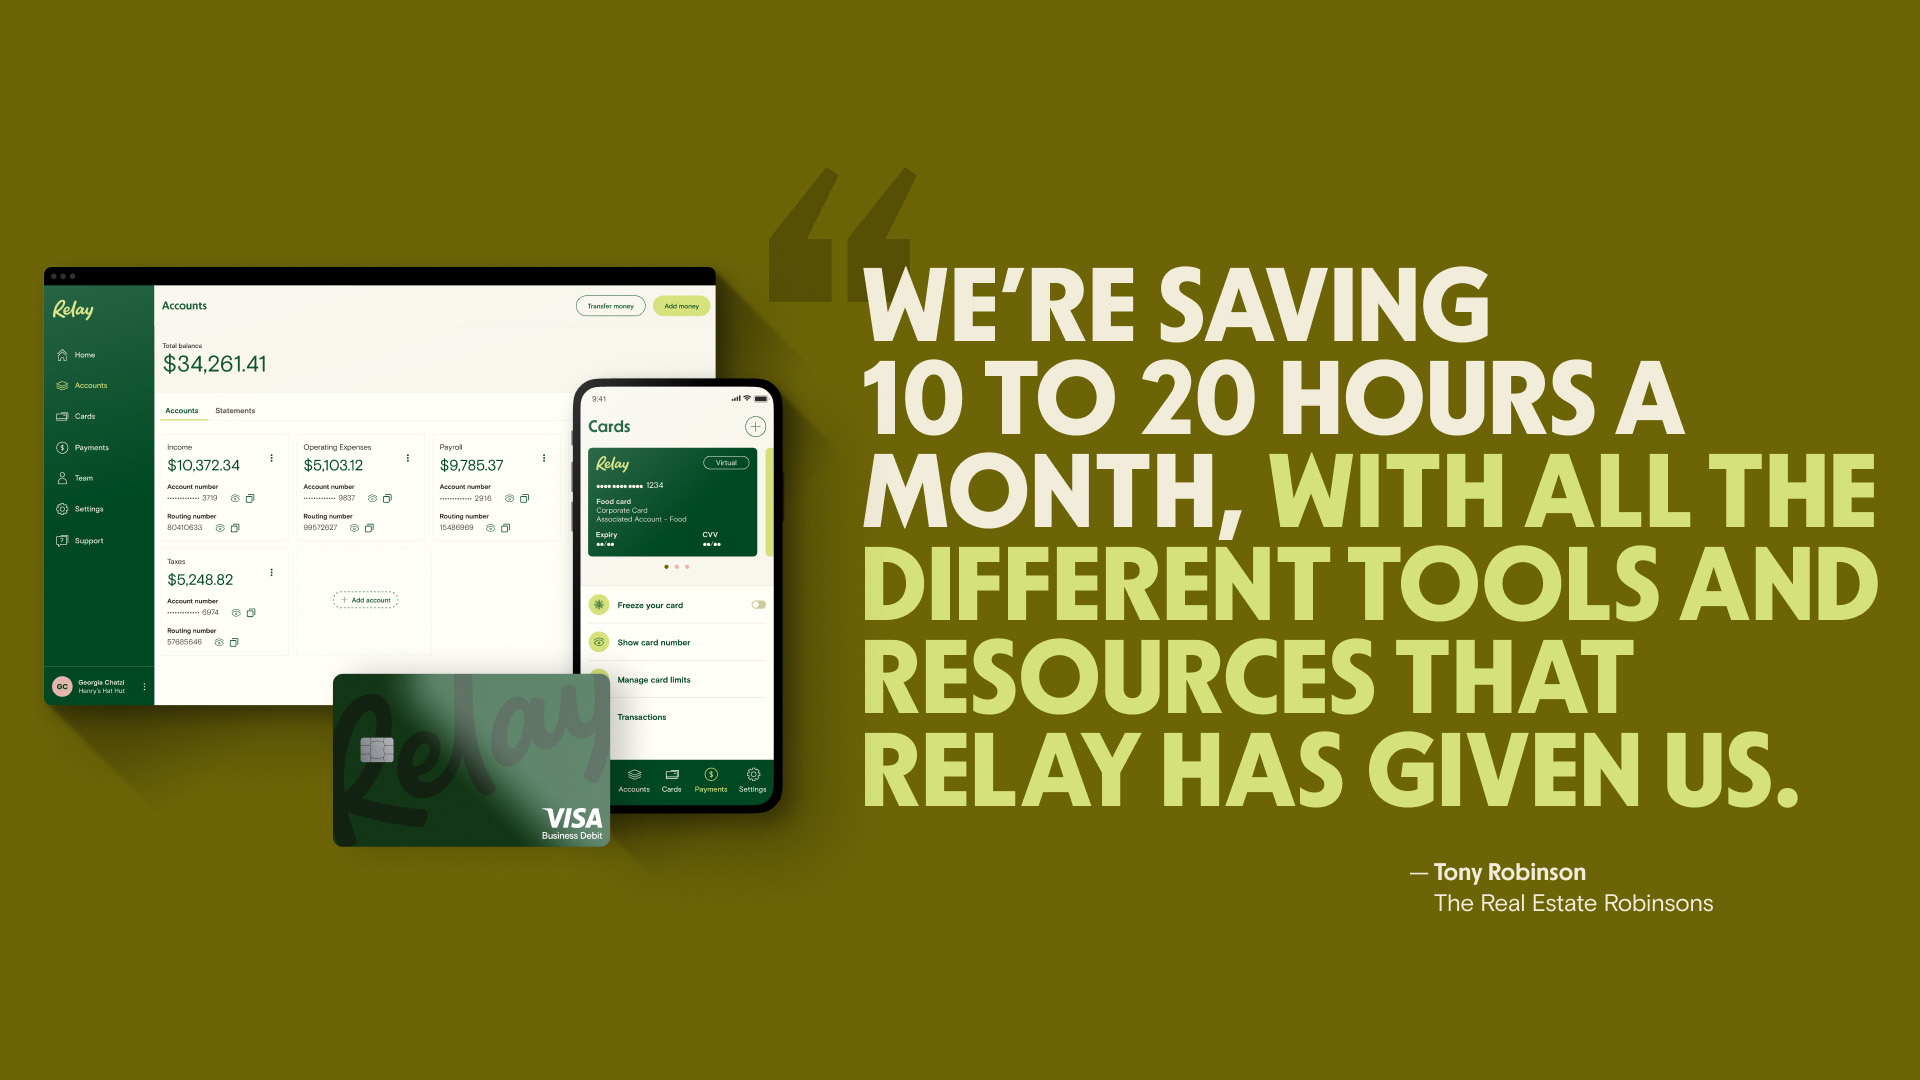 Banking with Relay saves The Real Estate Robinsons 10 to 20 hours each month